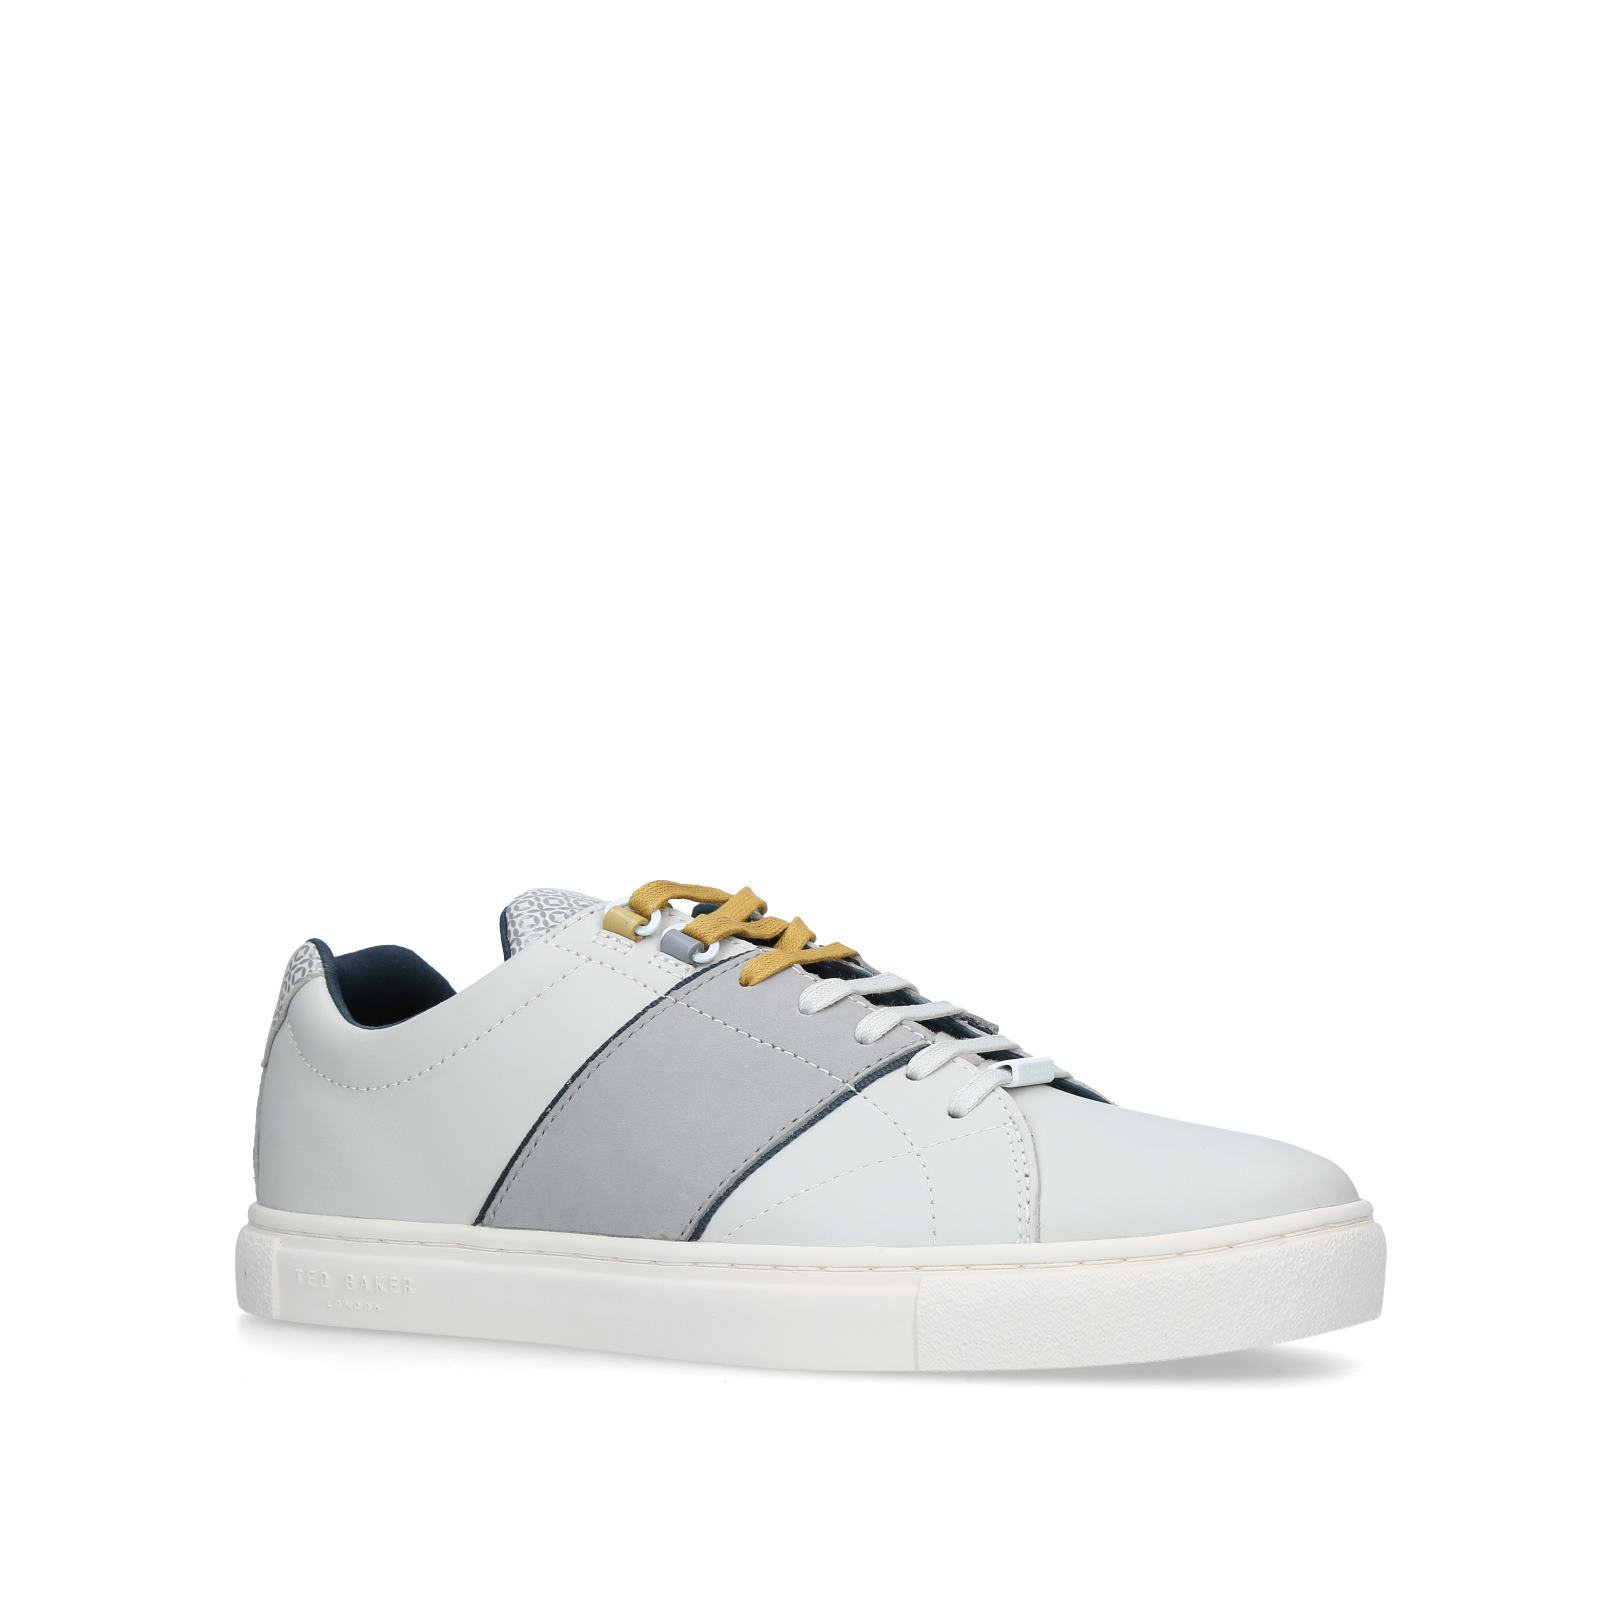 QUANA - TED BAKER Sneakers